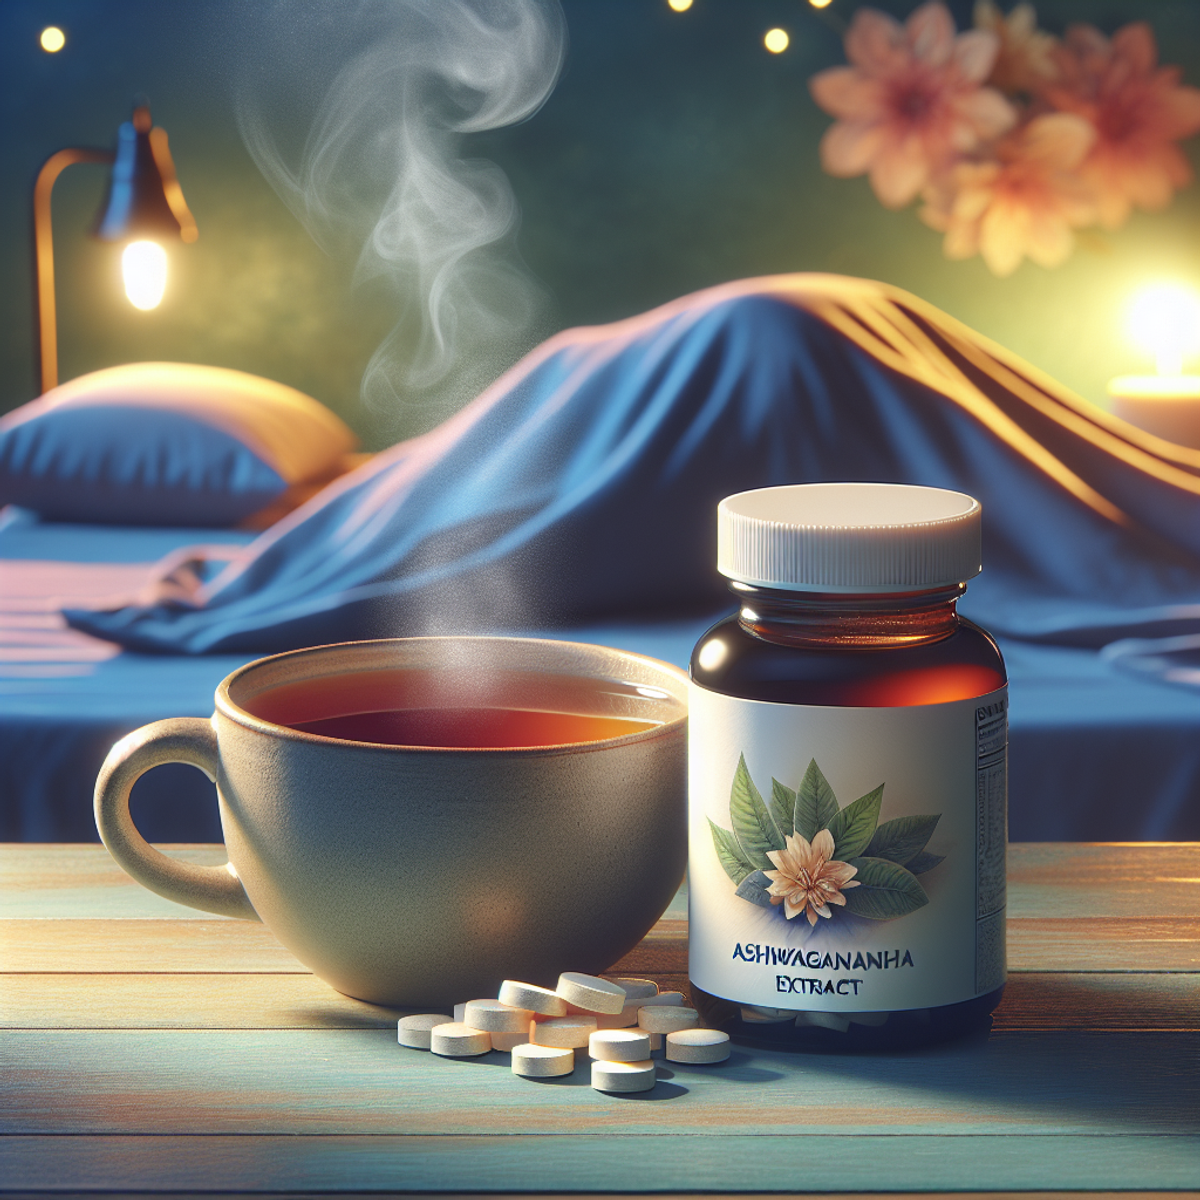 A cup of hot herbal tea steams gently beside a bottle of Ashwagandha extract tablets on a soft, inviting surface, surrounded by serene, subtle lighting.